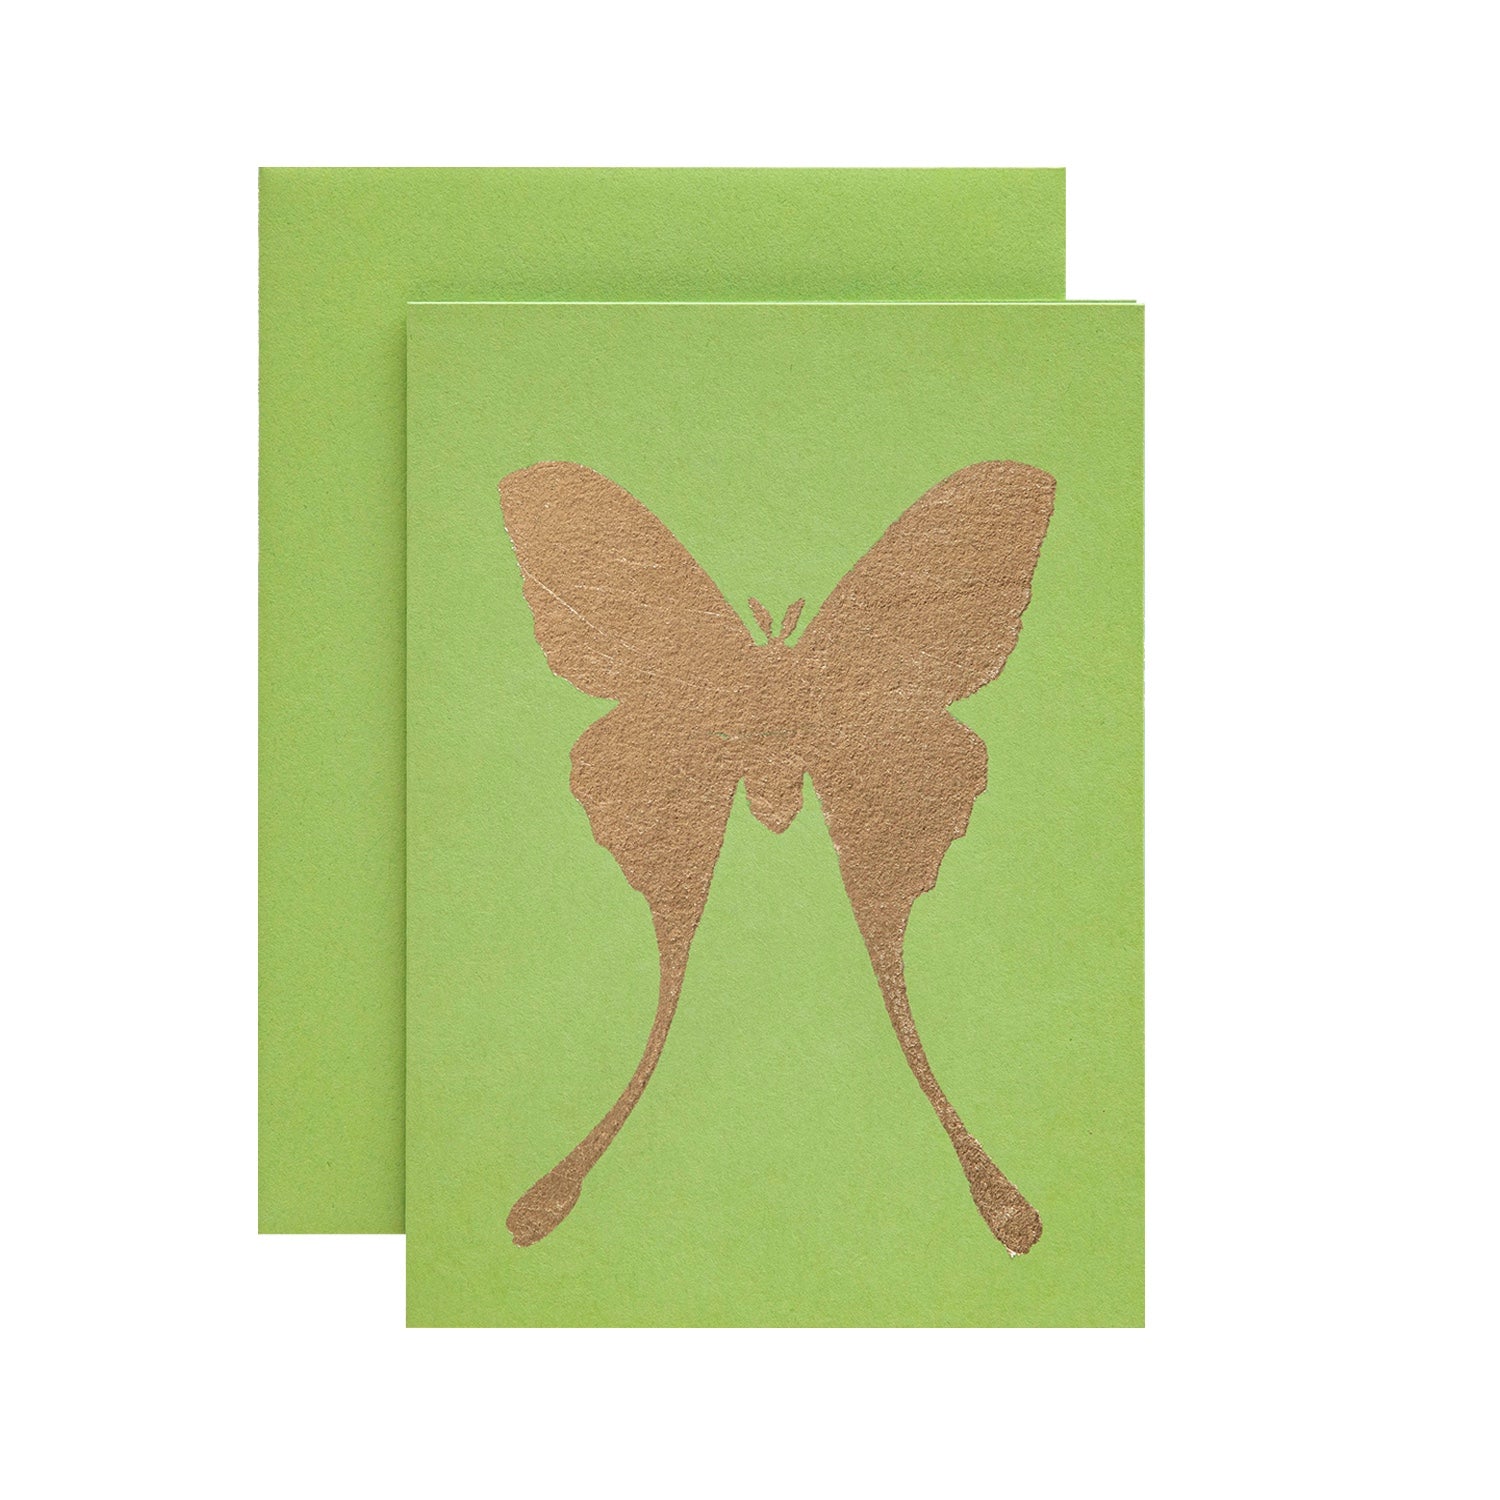 A Hester &amp; Cook Lime Green Luna Moth Card with a butterfly silhouette on it.